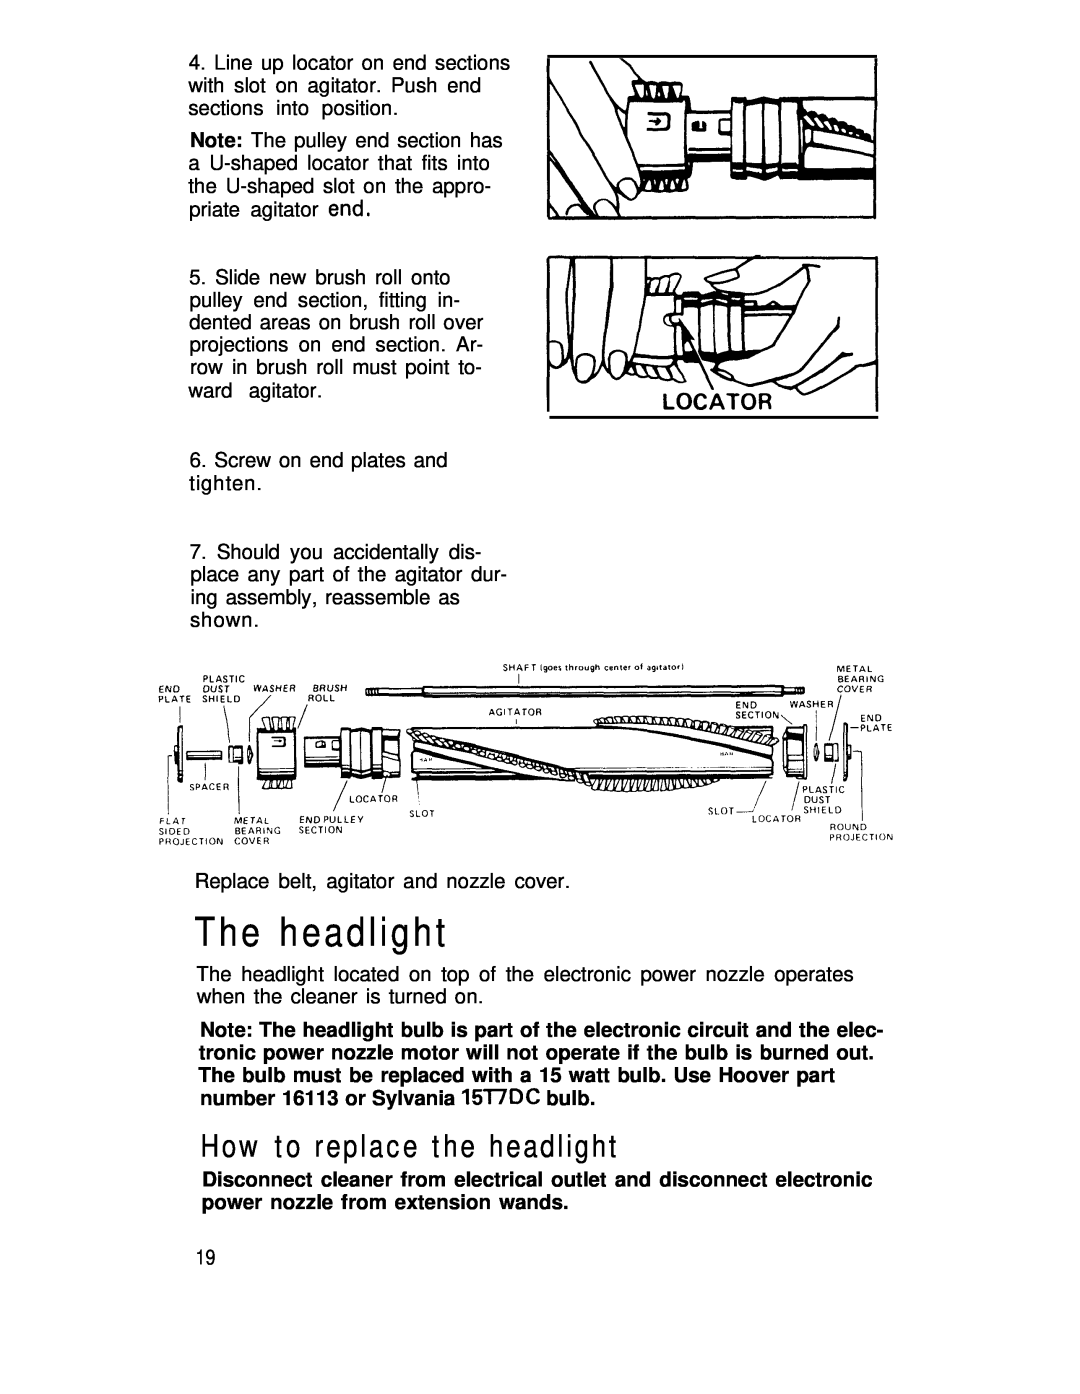 Hoover S3237, S3239 manual The headlight, How to replace the headlight 